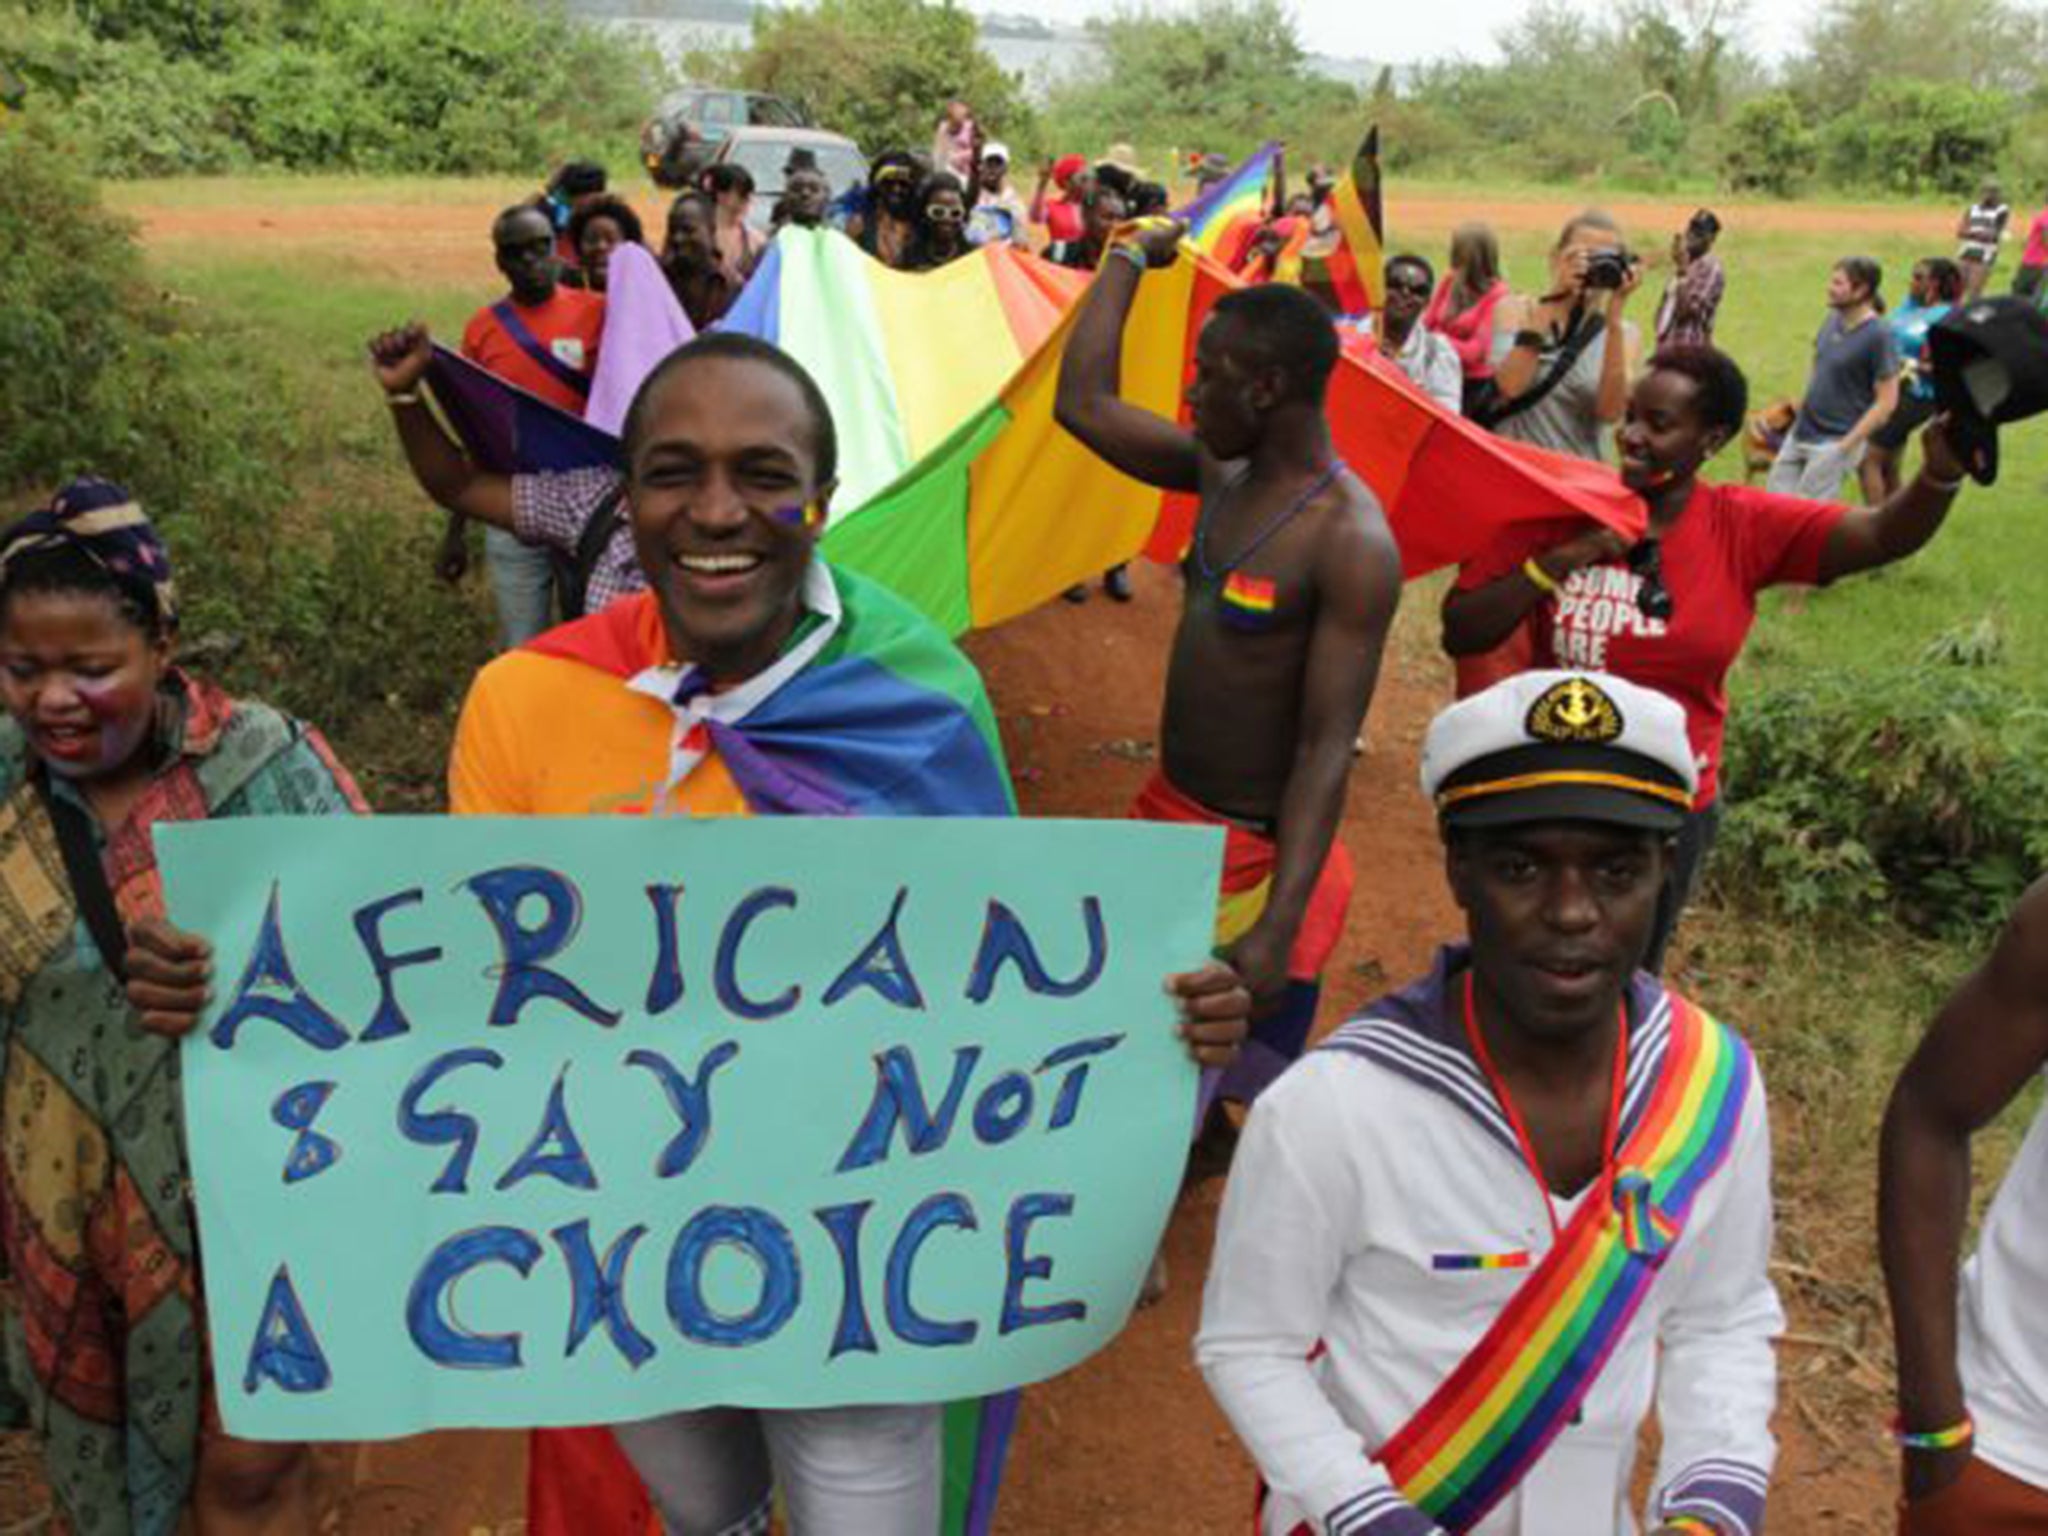 LGBT activists in Uganda, where homosexuals can face life imprisonment